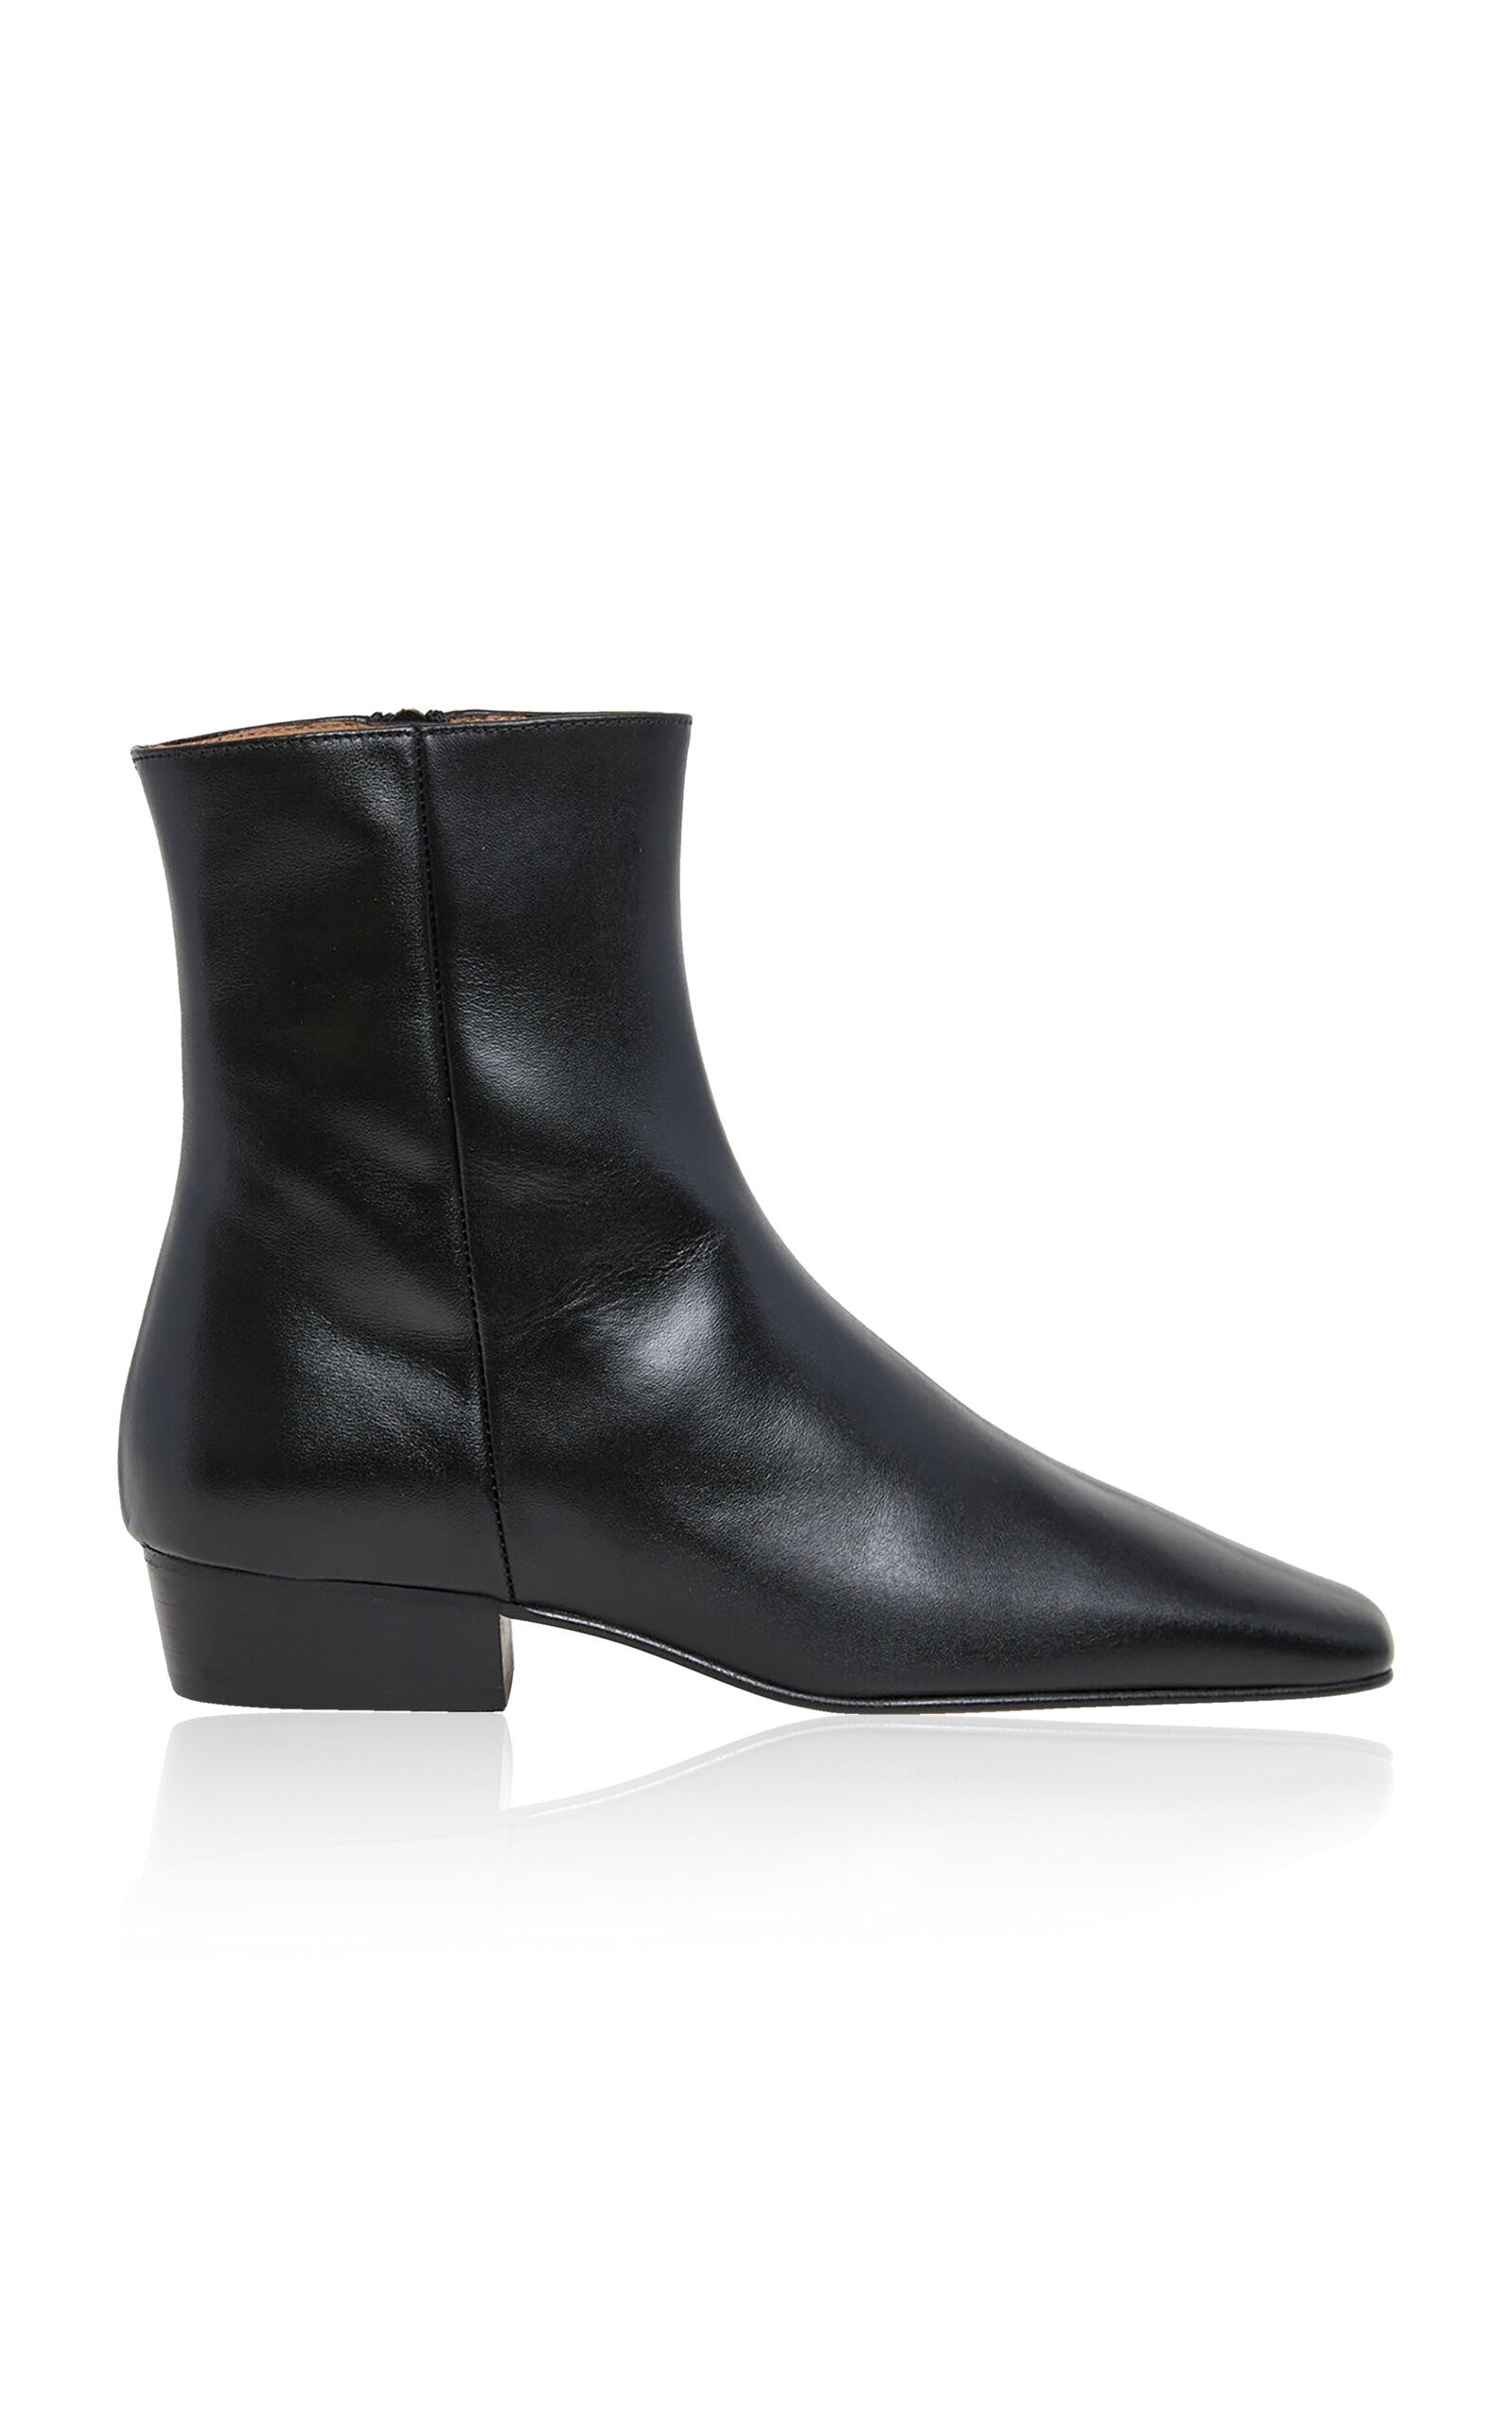 Rami Leather Boots